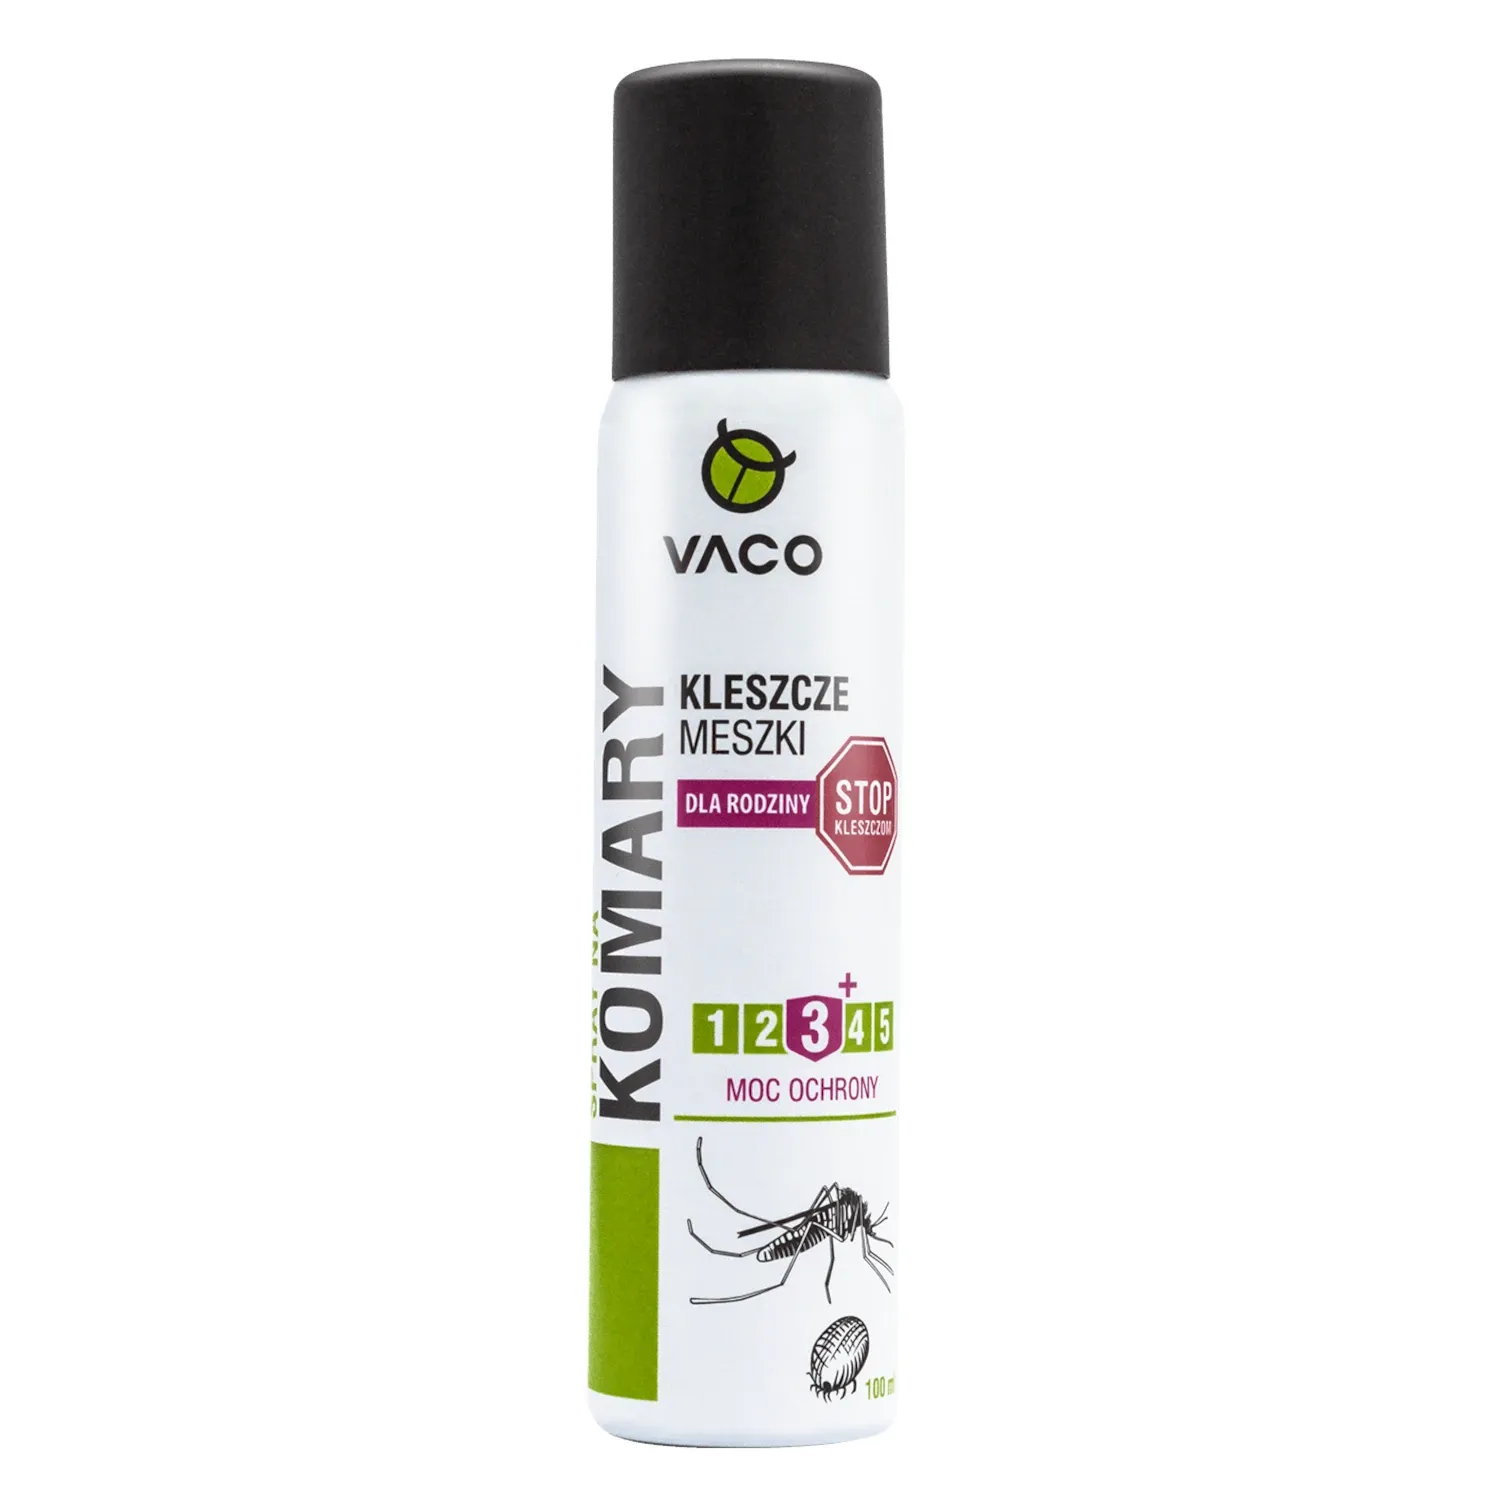 VACO SPRAY FOR MOSQUITOES, TICKS AND MUES